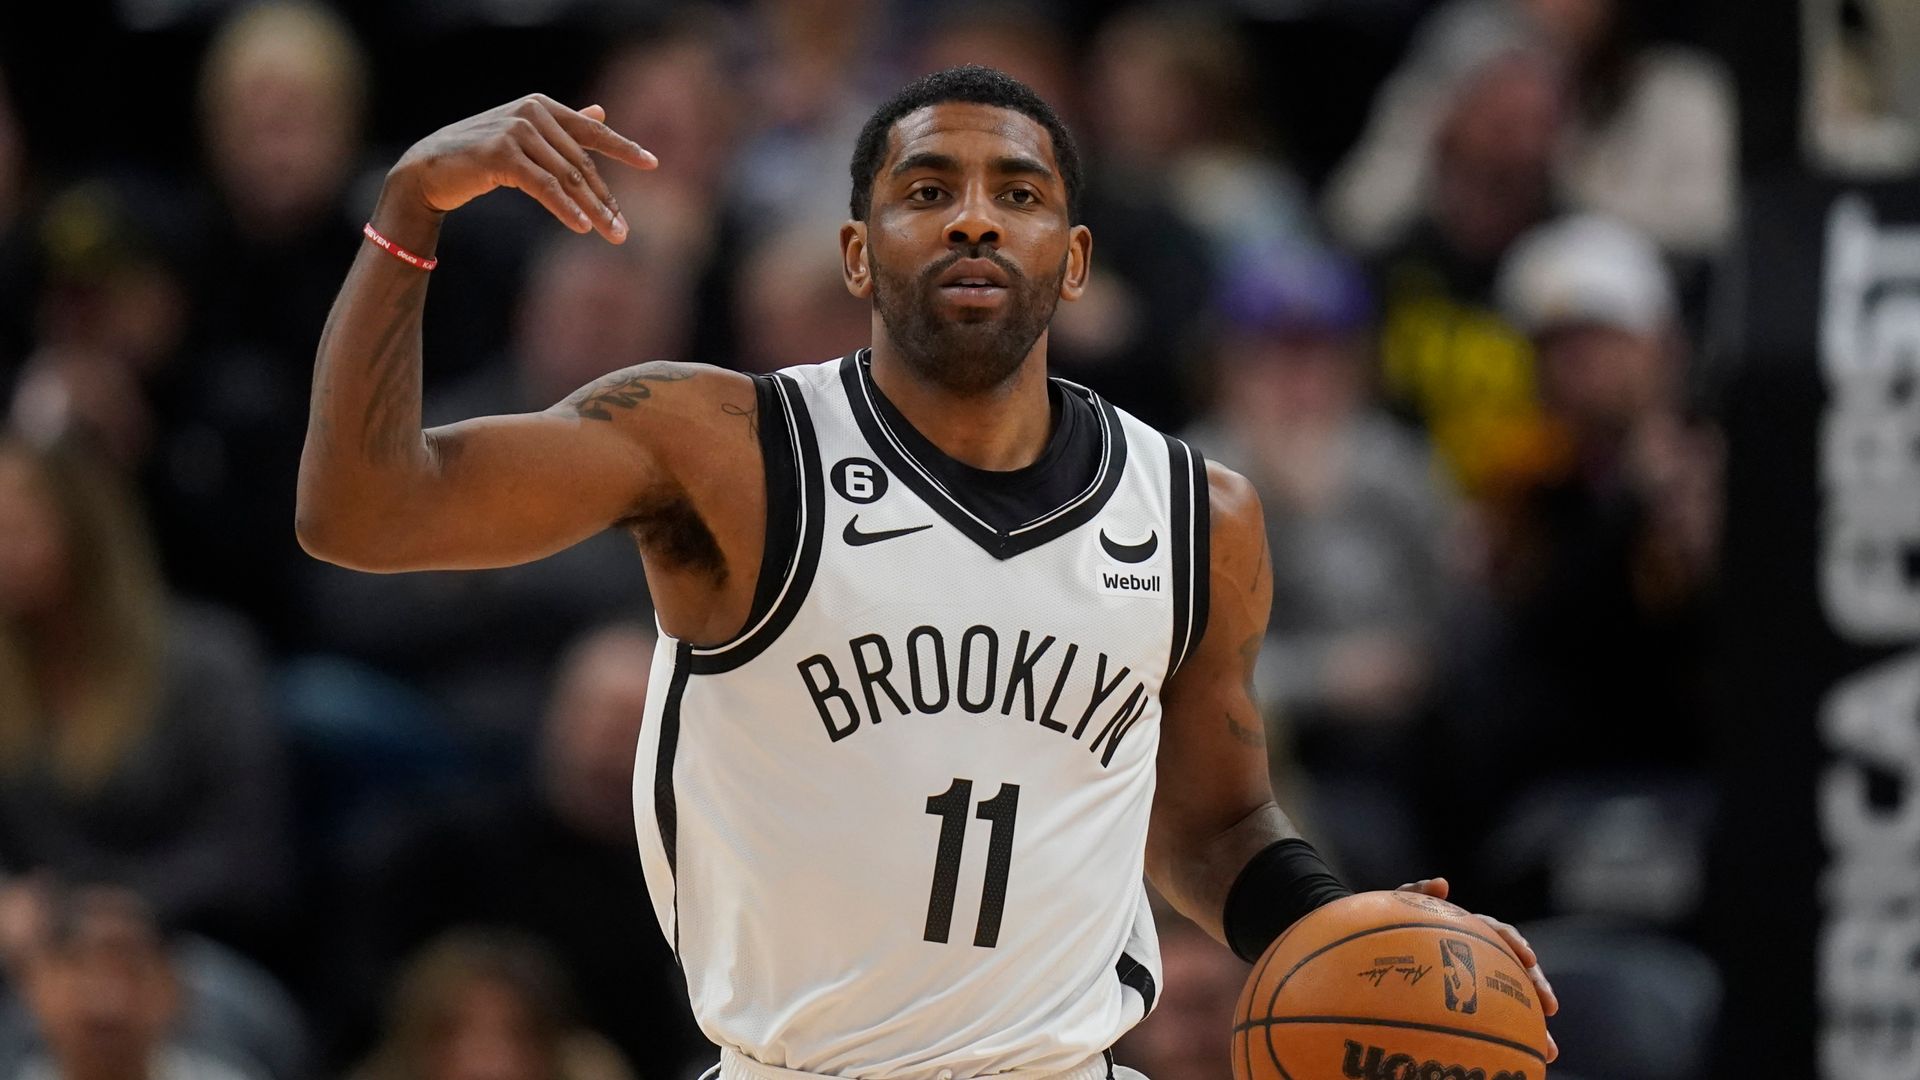 NBA All-Star Irving requests trade from Nets ahead of deadline